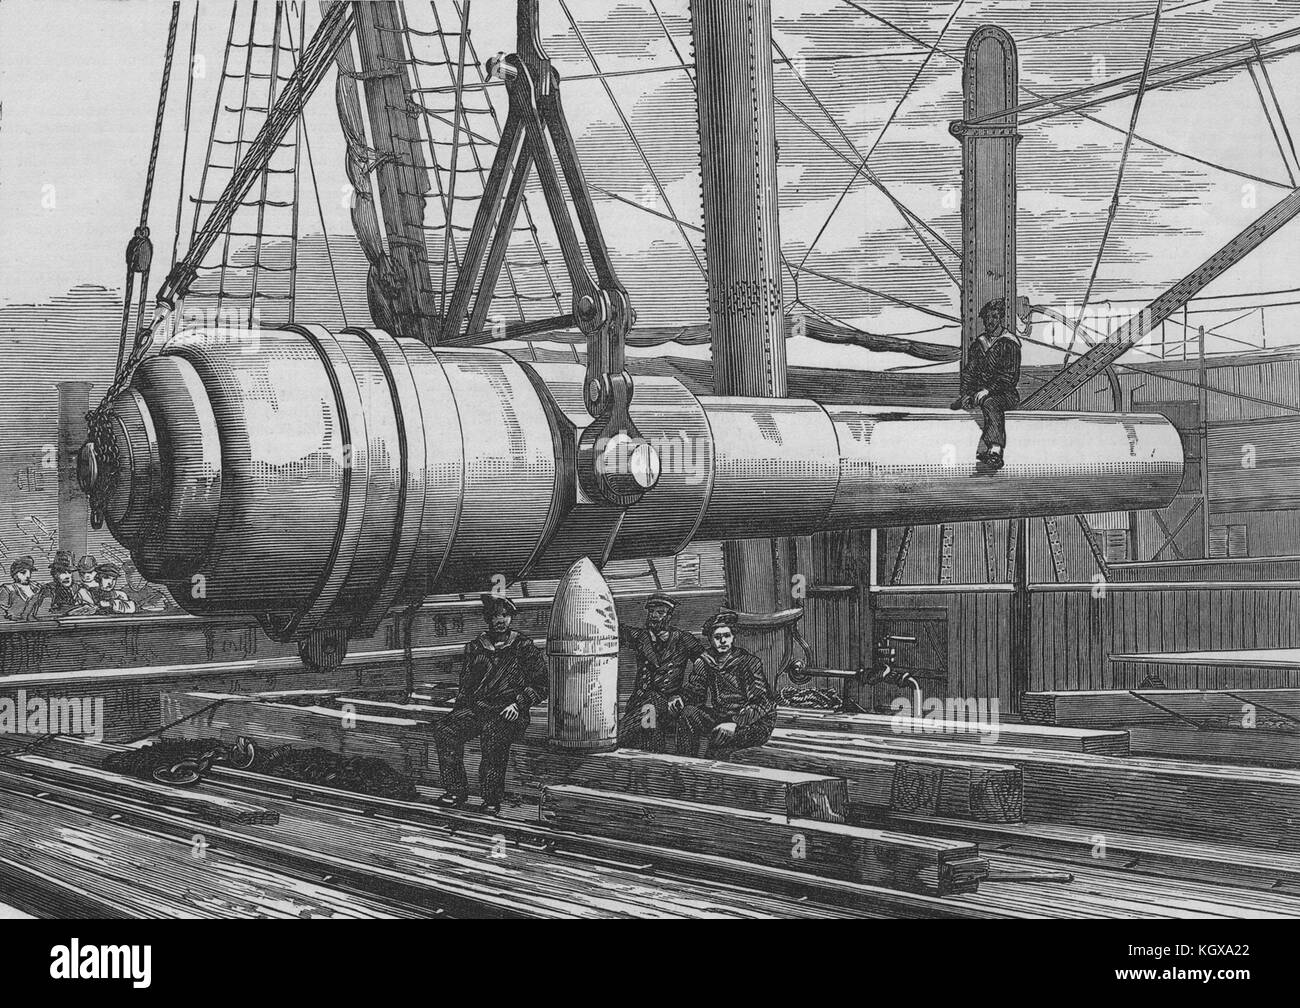 Shipment of the 100 ton gun at the Elswick Ironworks, Newcastle-on-Tyne 1889. The Illustrated London News Stock Photo